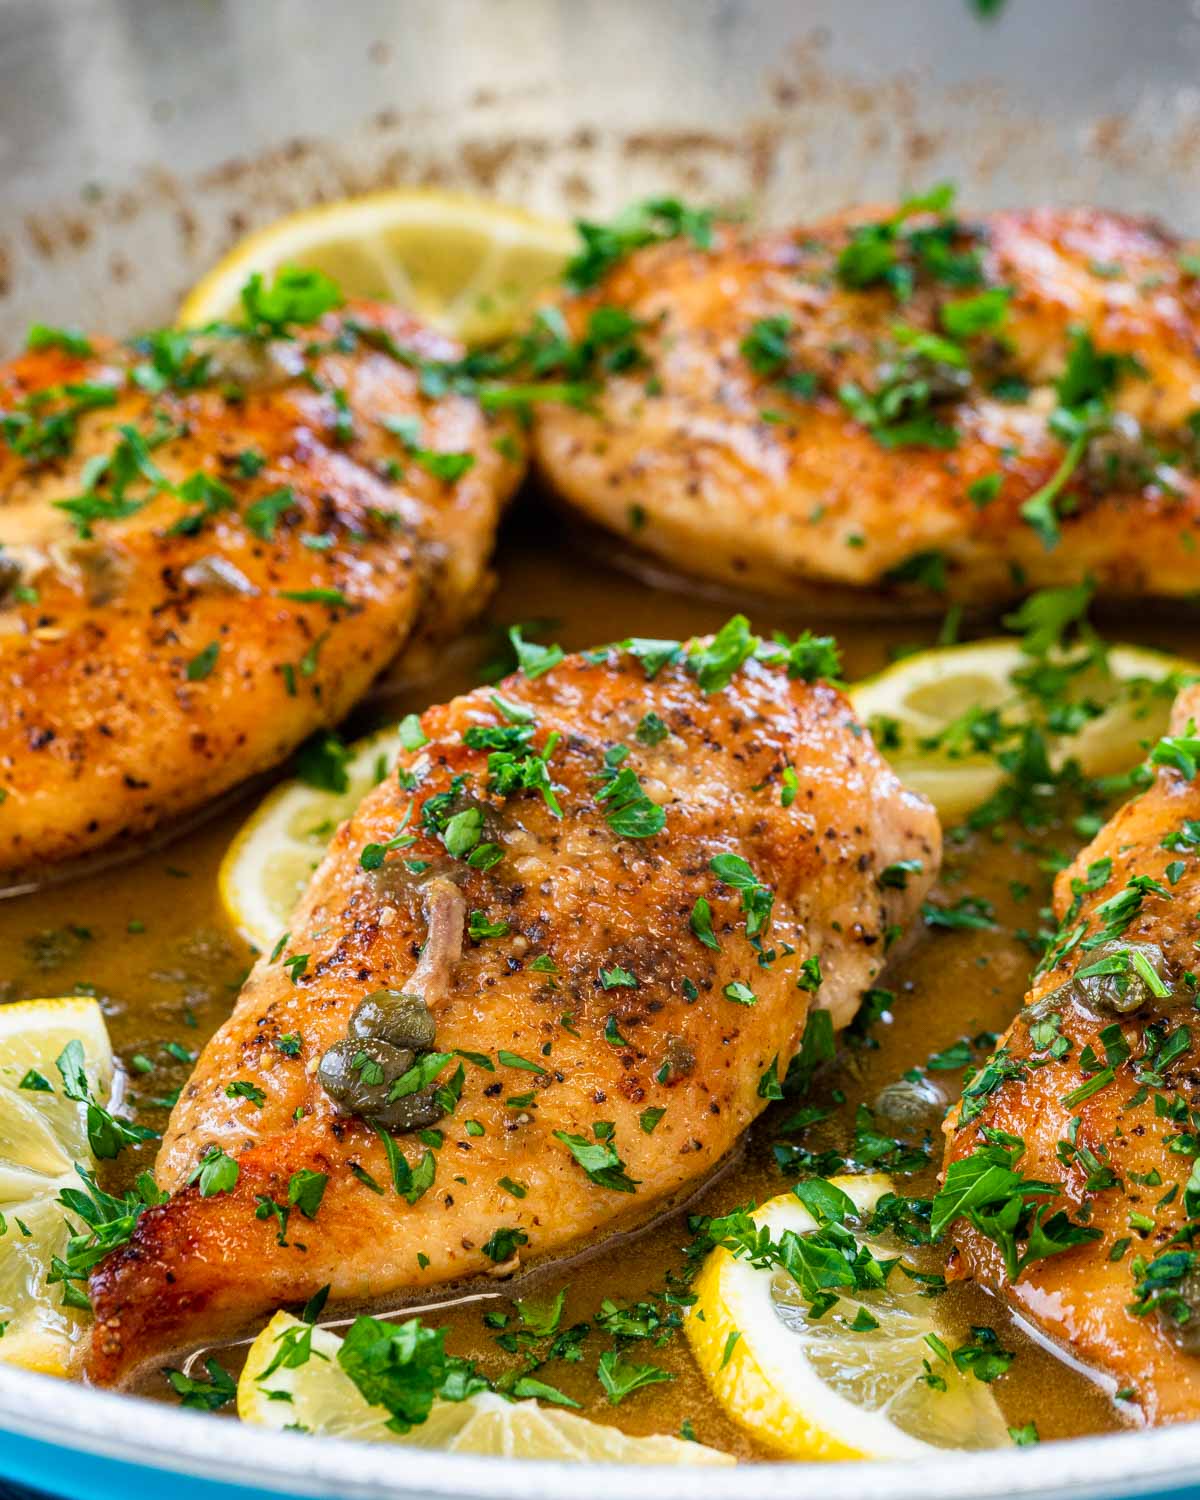 freshly made chicken piccata in a skillet garnished with parsley and lemon wedges.